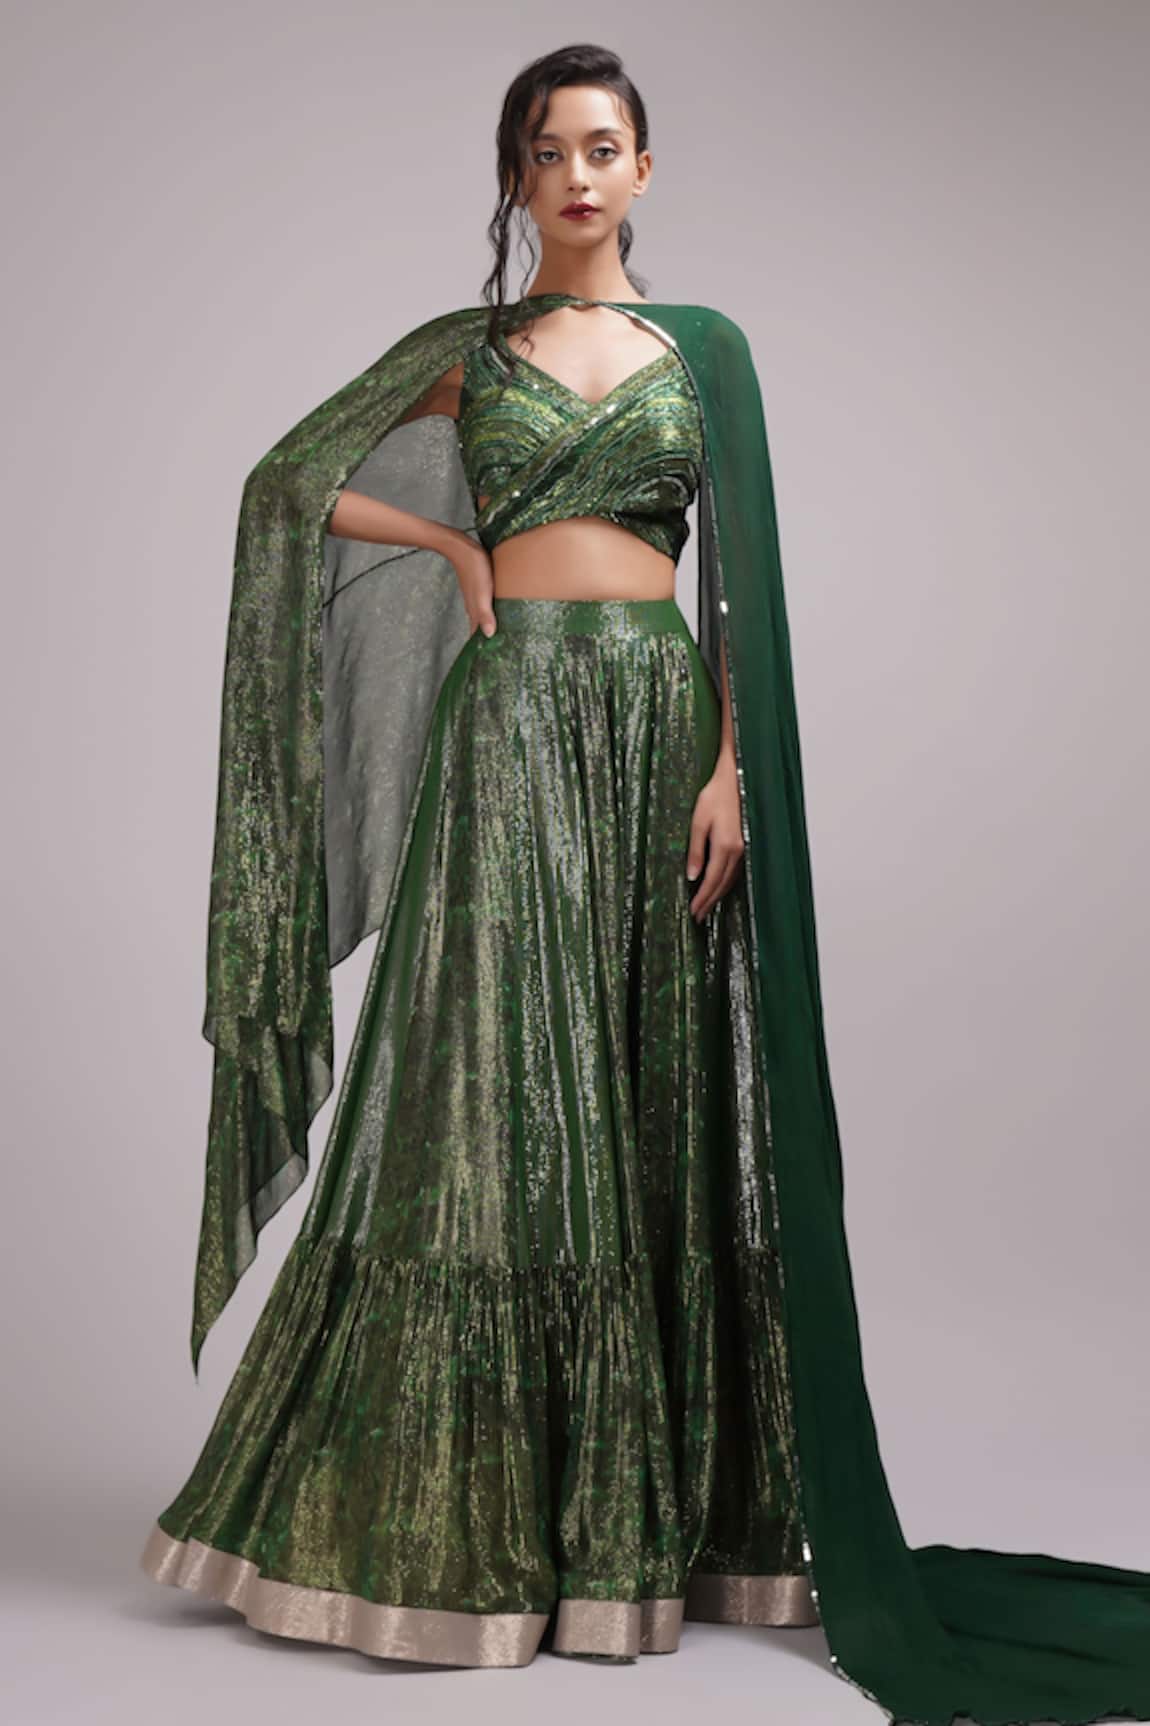 Breathe by Aakanksha Singh Madelief Shimmer Embroidered Lehenga Set With Cape